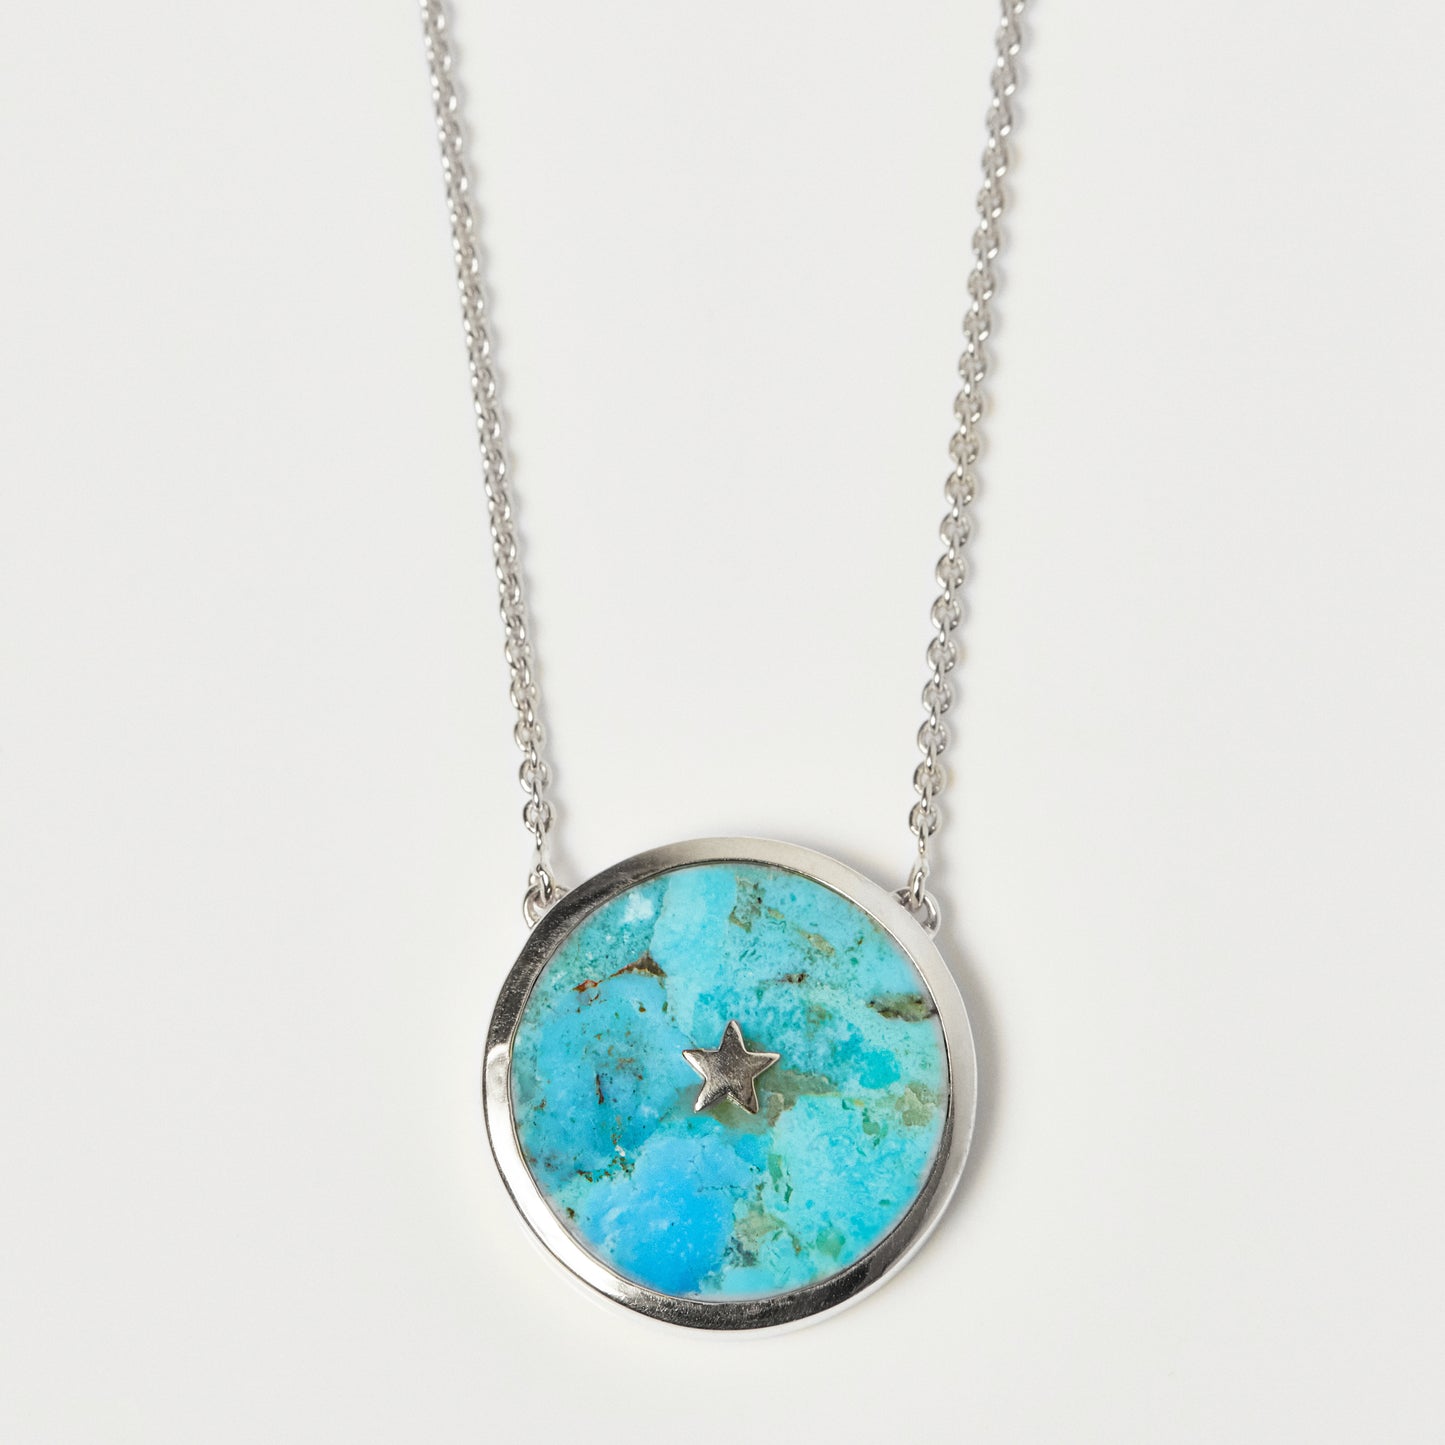 Sterling Silver Night Sky Pendant in Turquoise - Necklace - Carrie Elizabeth